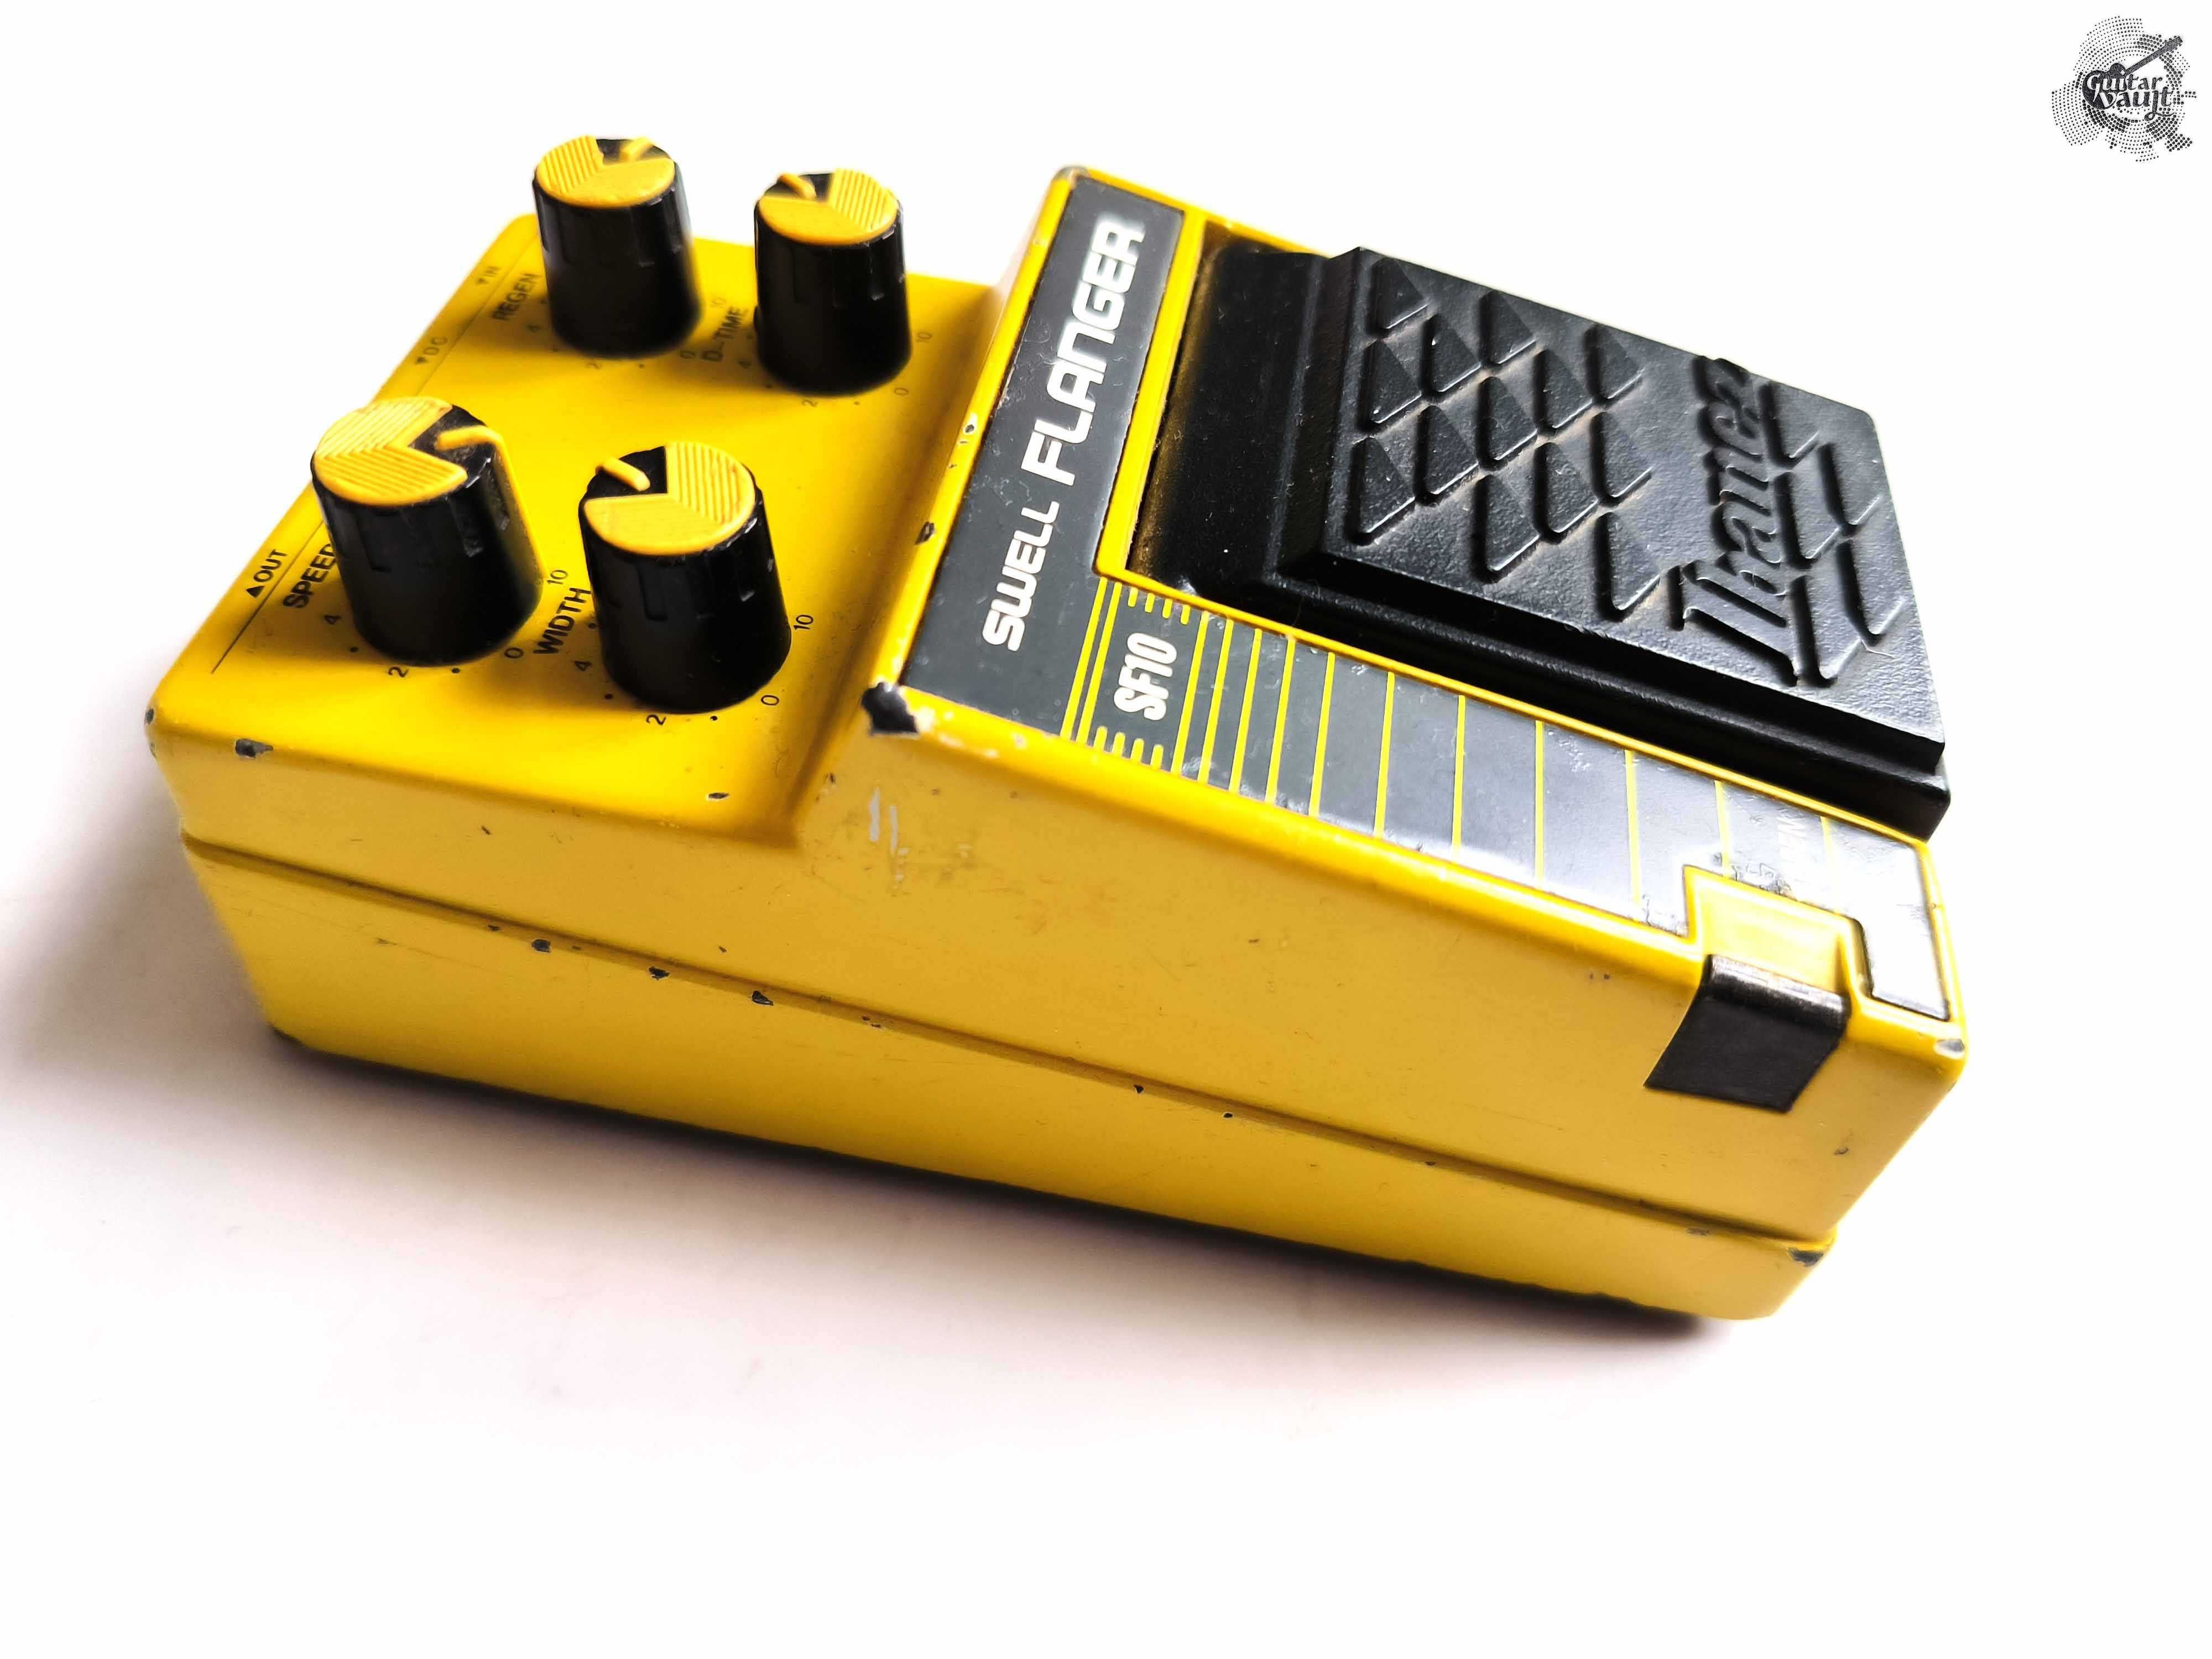 Ibanez Japan SF10 Swell Flanger 1980s - Yellow